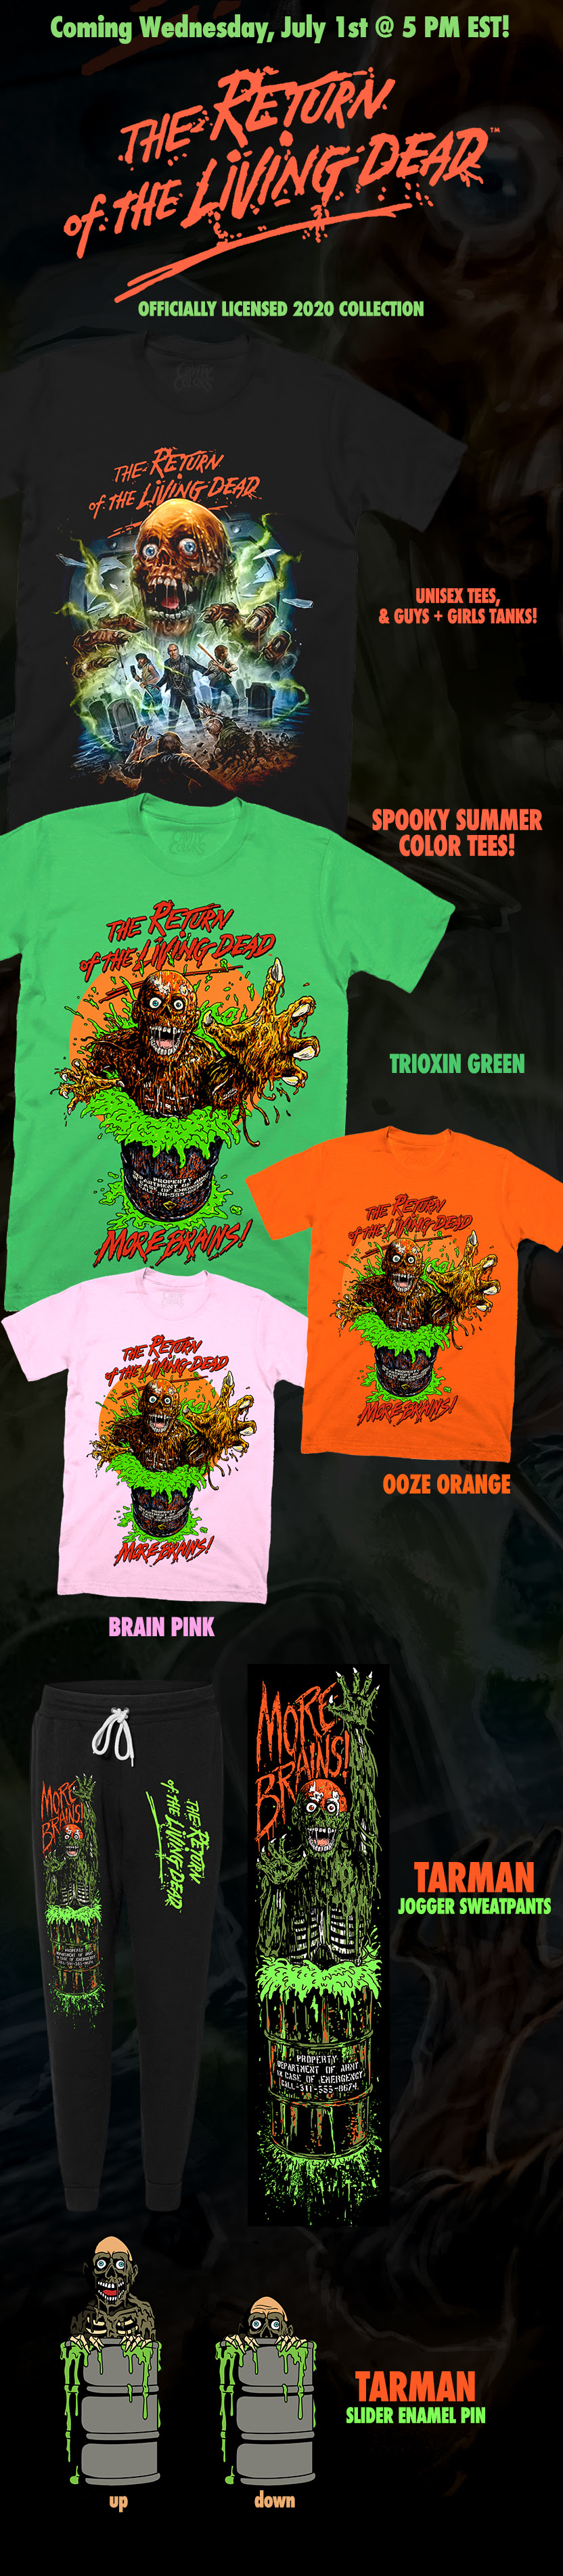 New RETURN OF THE LIVING DEAD Collection Coming July 1st from Cavity ...